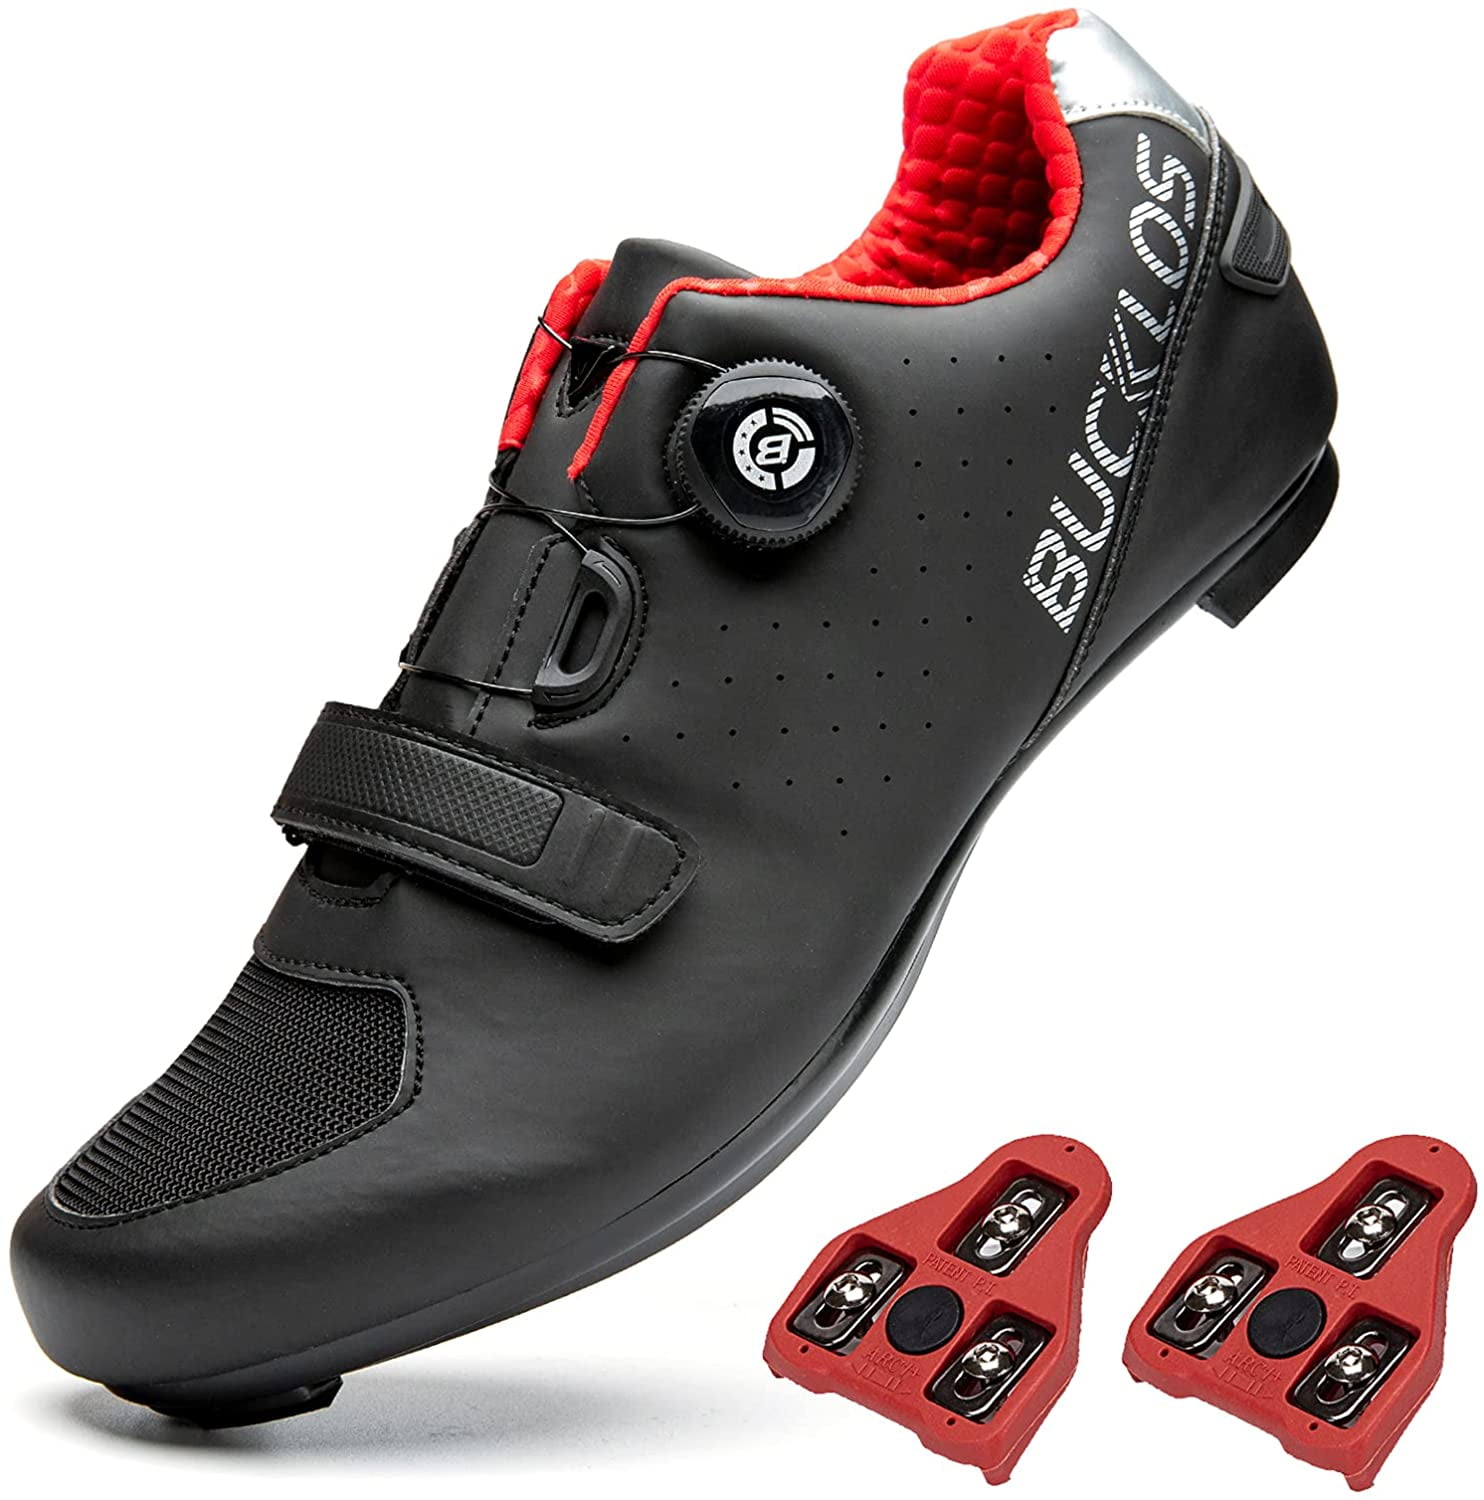 Unisex Bicycle Riding Spin Shoes Indoor Road Rcing Bikes Shoe Men's Cycling Shoes for Women Compatible with Peloton SPD ARC Look Delta Cleats 